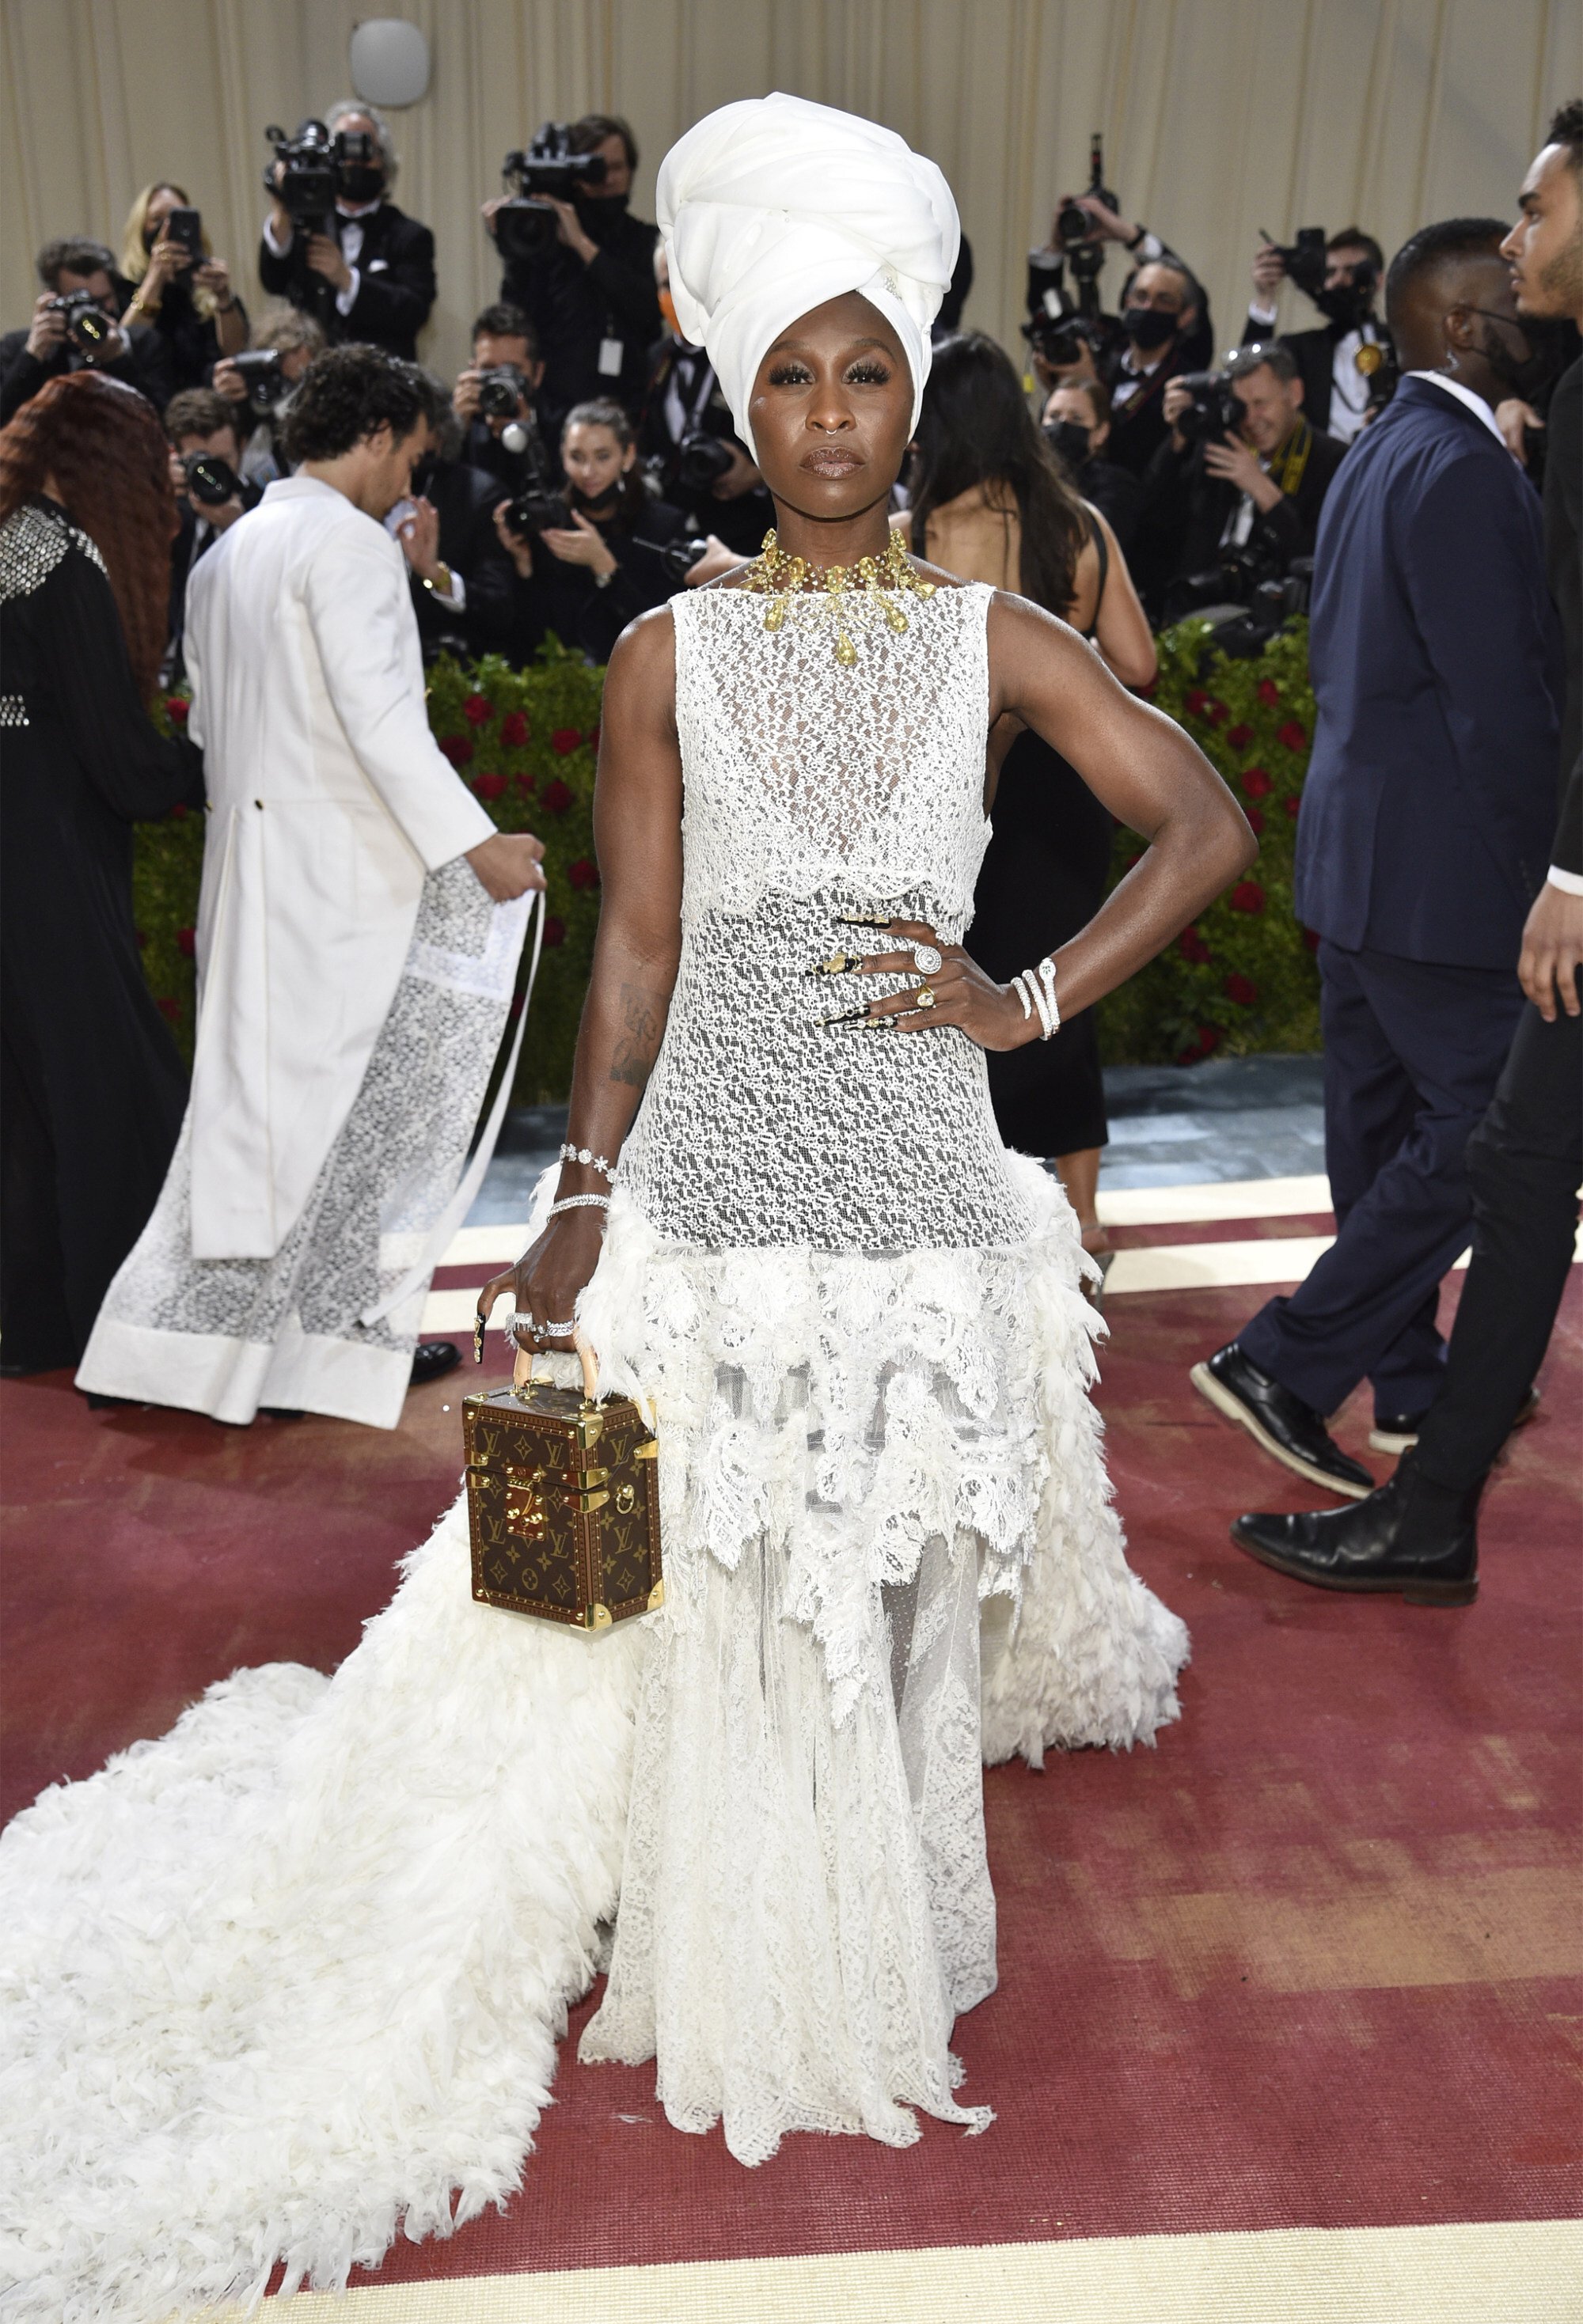 Cynthia Erivo wore Louis Vuitton for her red carpet appearance. Photo: AP